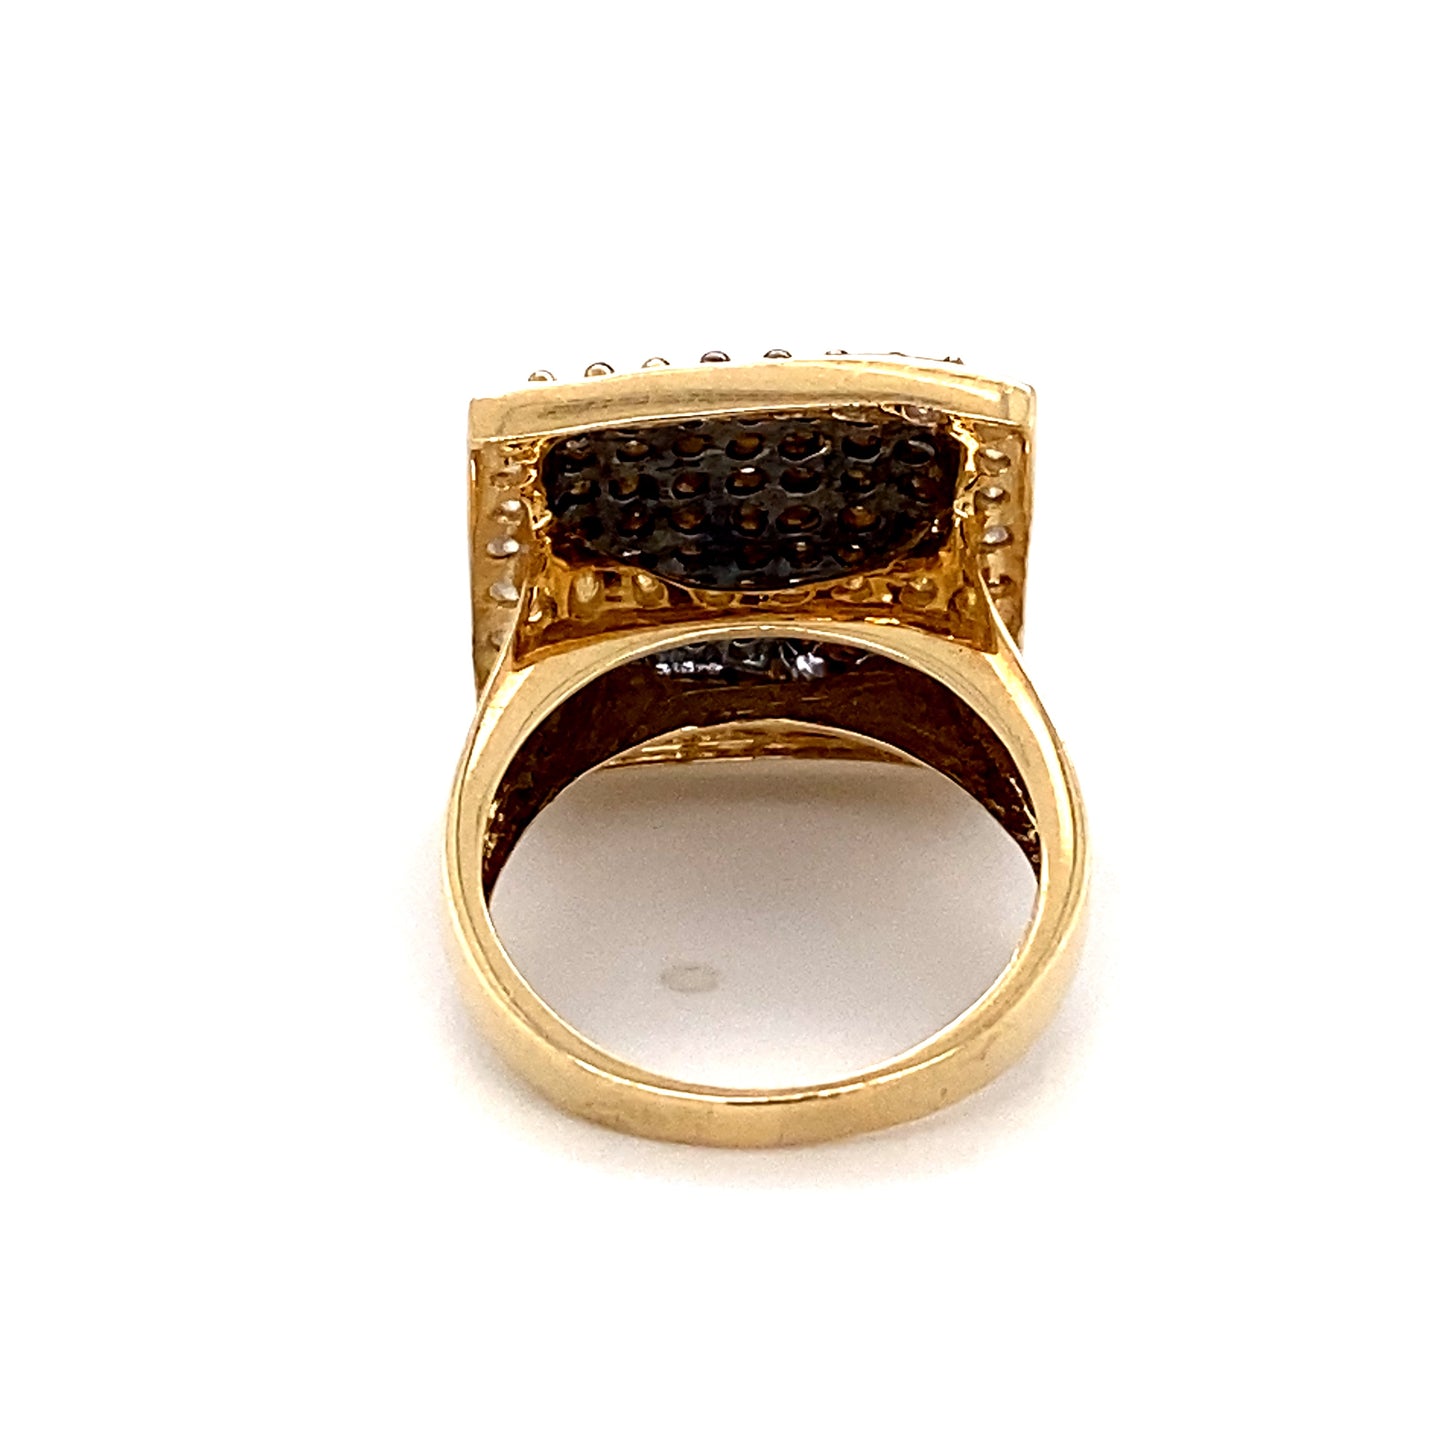 Vintage White and Brown Diamond Square Ring in 10K Gold